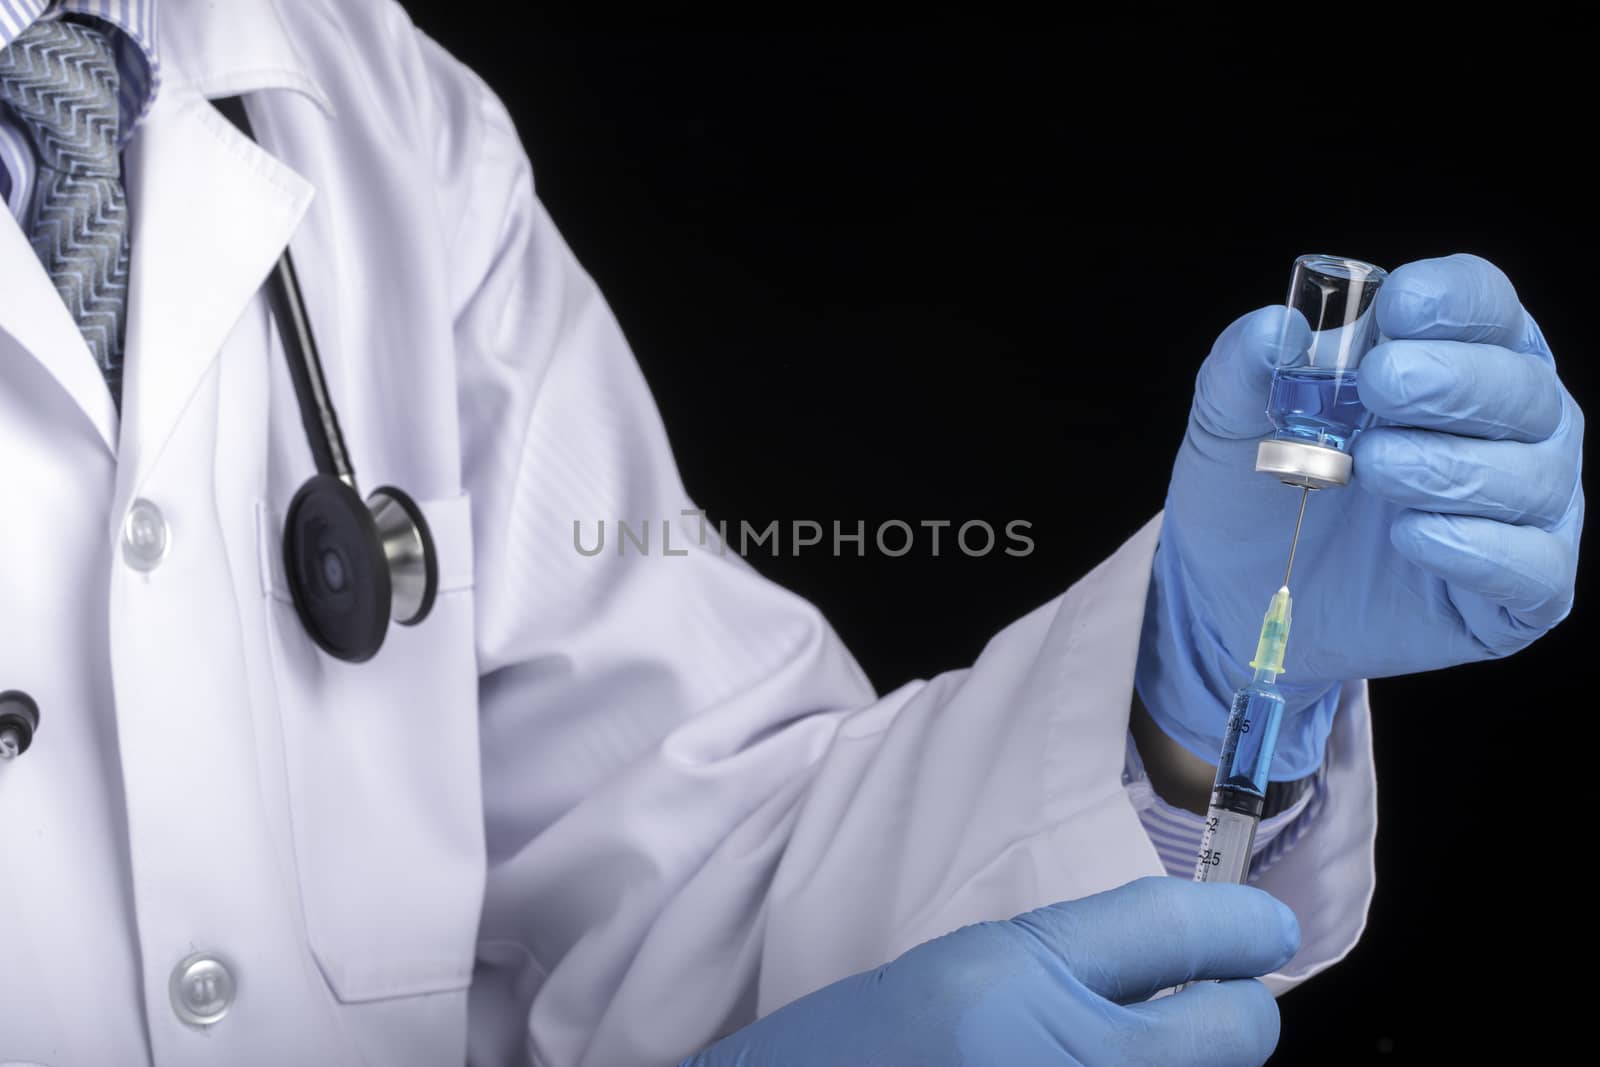 A doctor in white coat drawing clear light blue liquid from a vial into a syringe. Medication or vaccine adminstration, covid-19 prevention concept. Dark background.